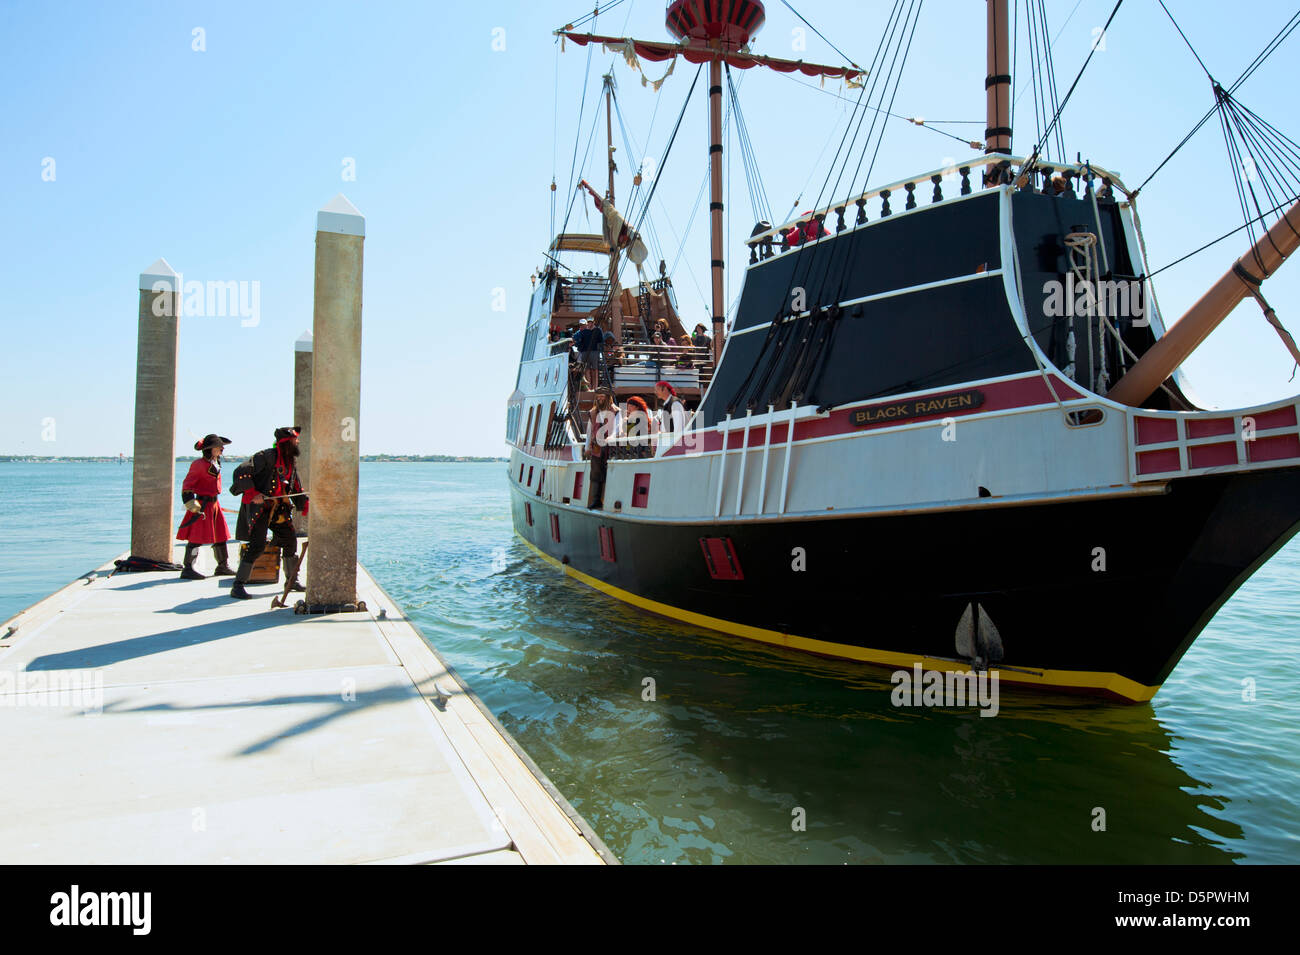 A pirate ship with pirates, 'The Black Raven' sailing near the Vilano Beach Floating Pier in St. Augustine Florida Stock Photo